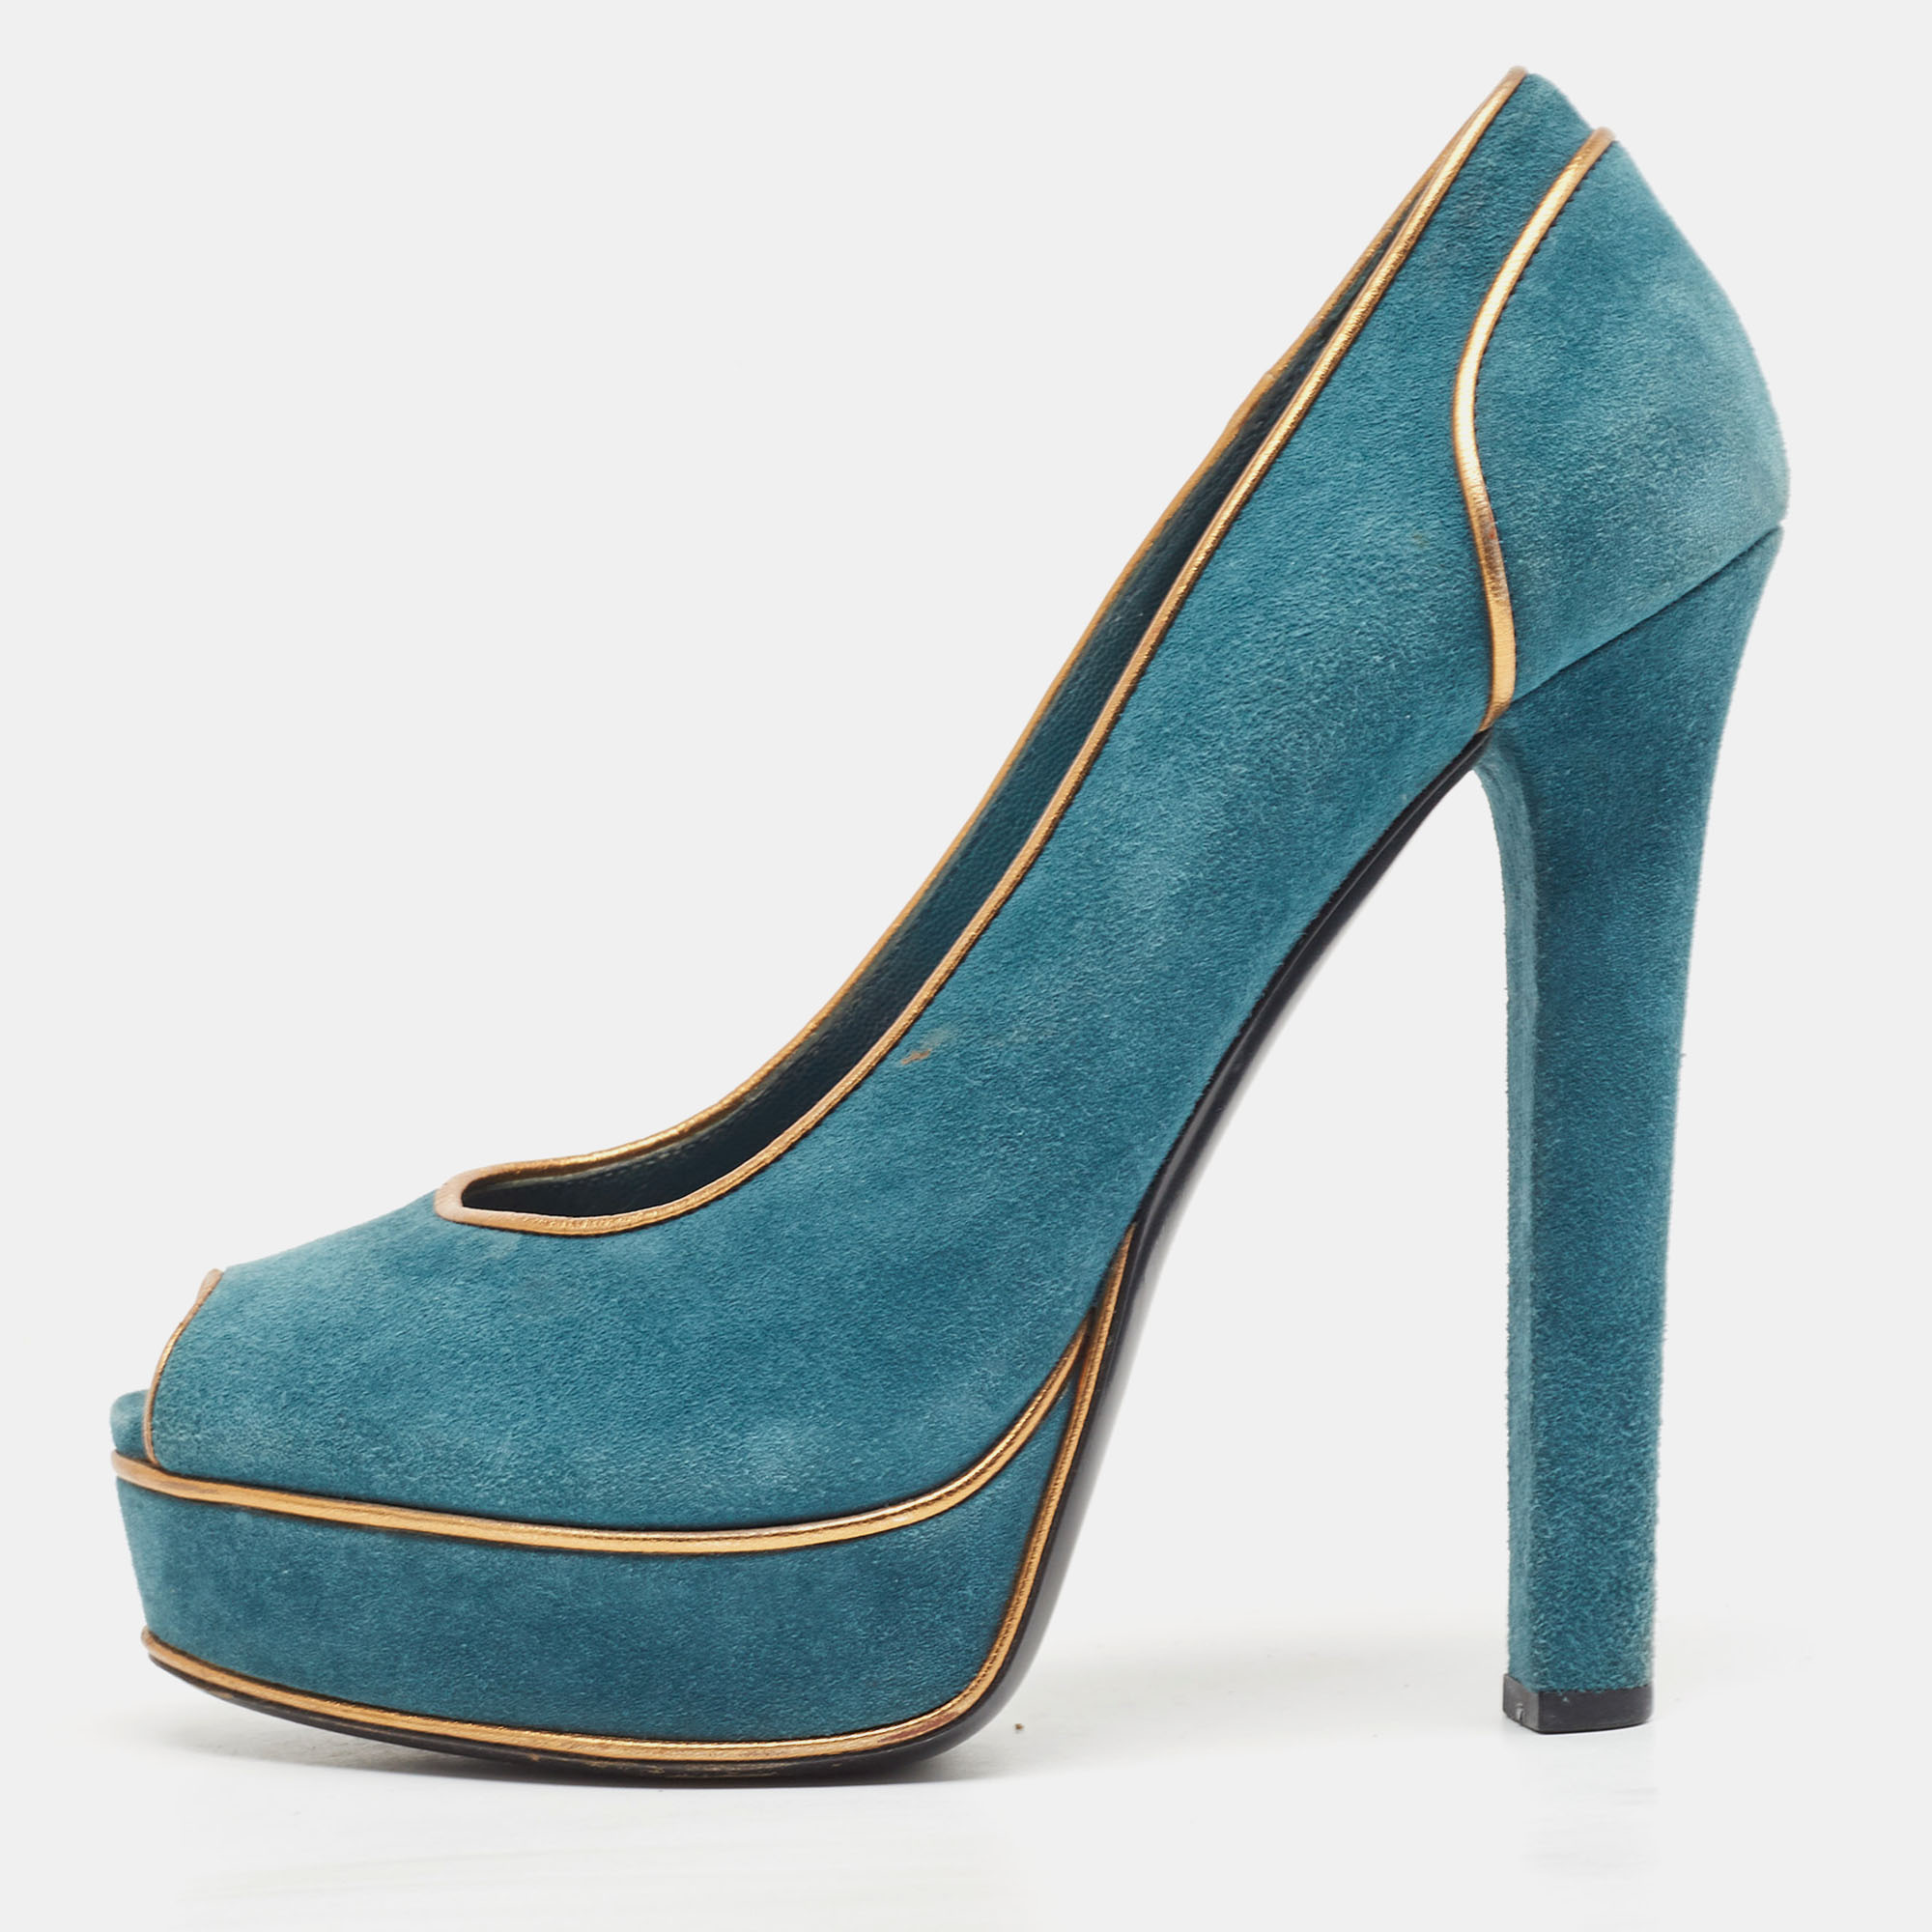 Pre-owned Gucci Teal/gold Suede Peep Toe Platform Pumps Size 38.5 In Green